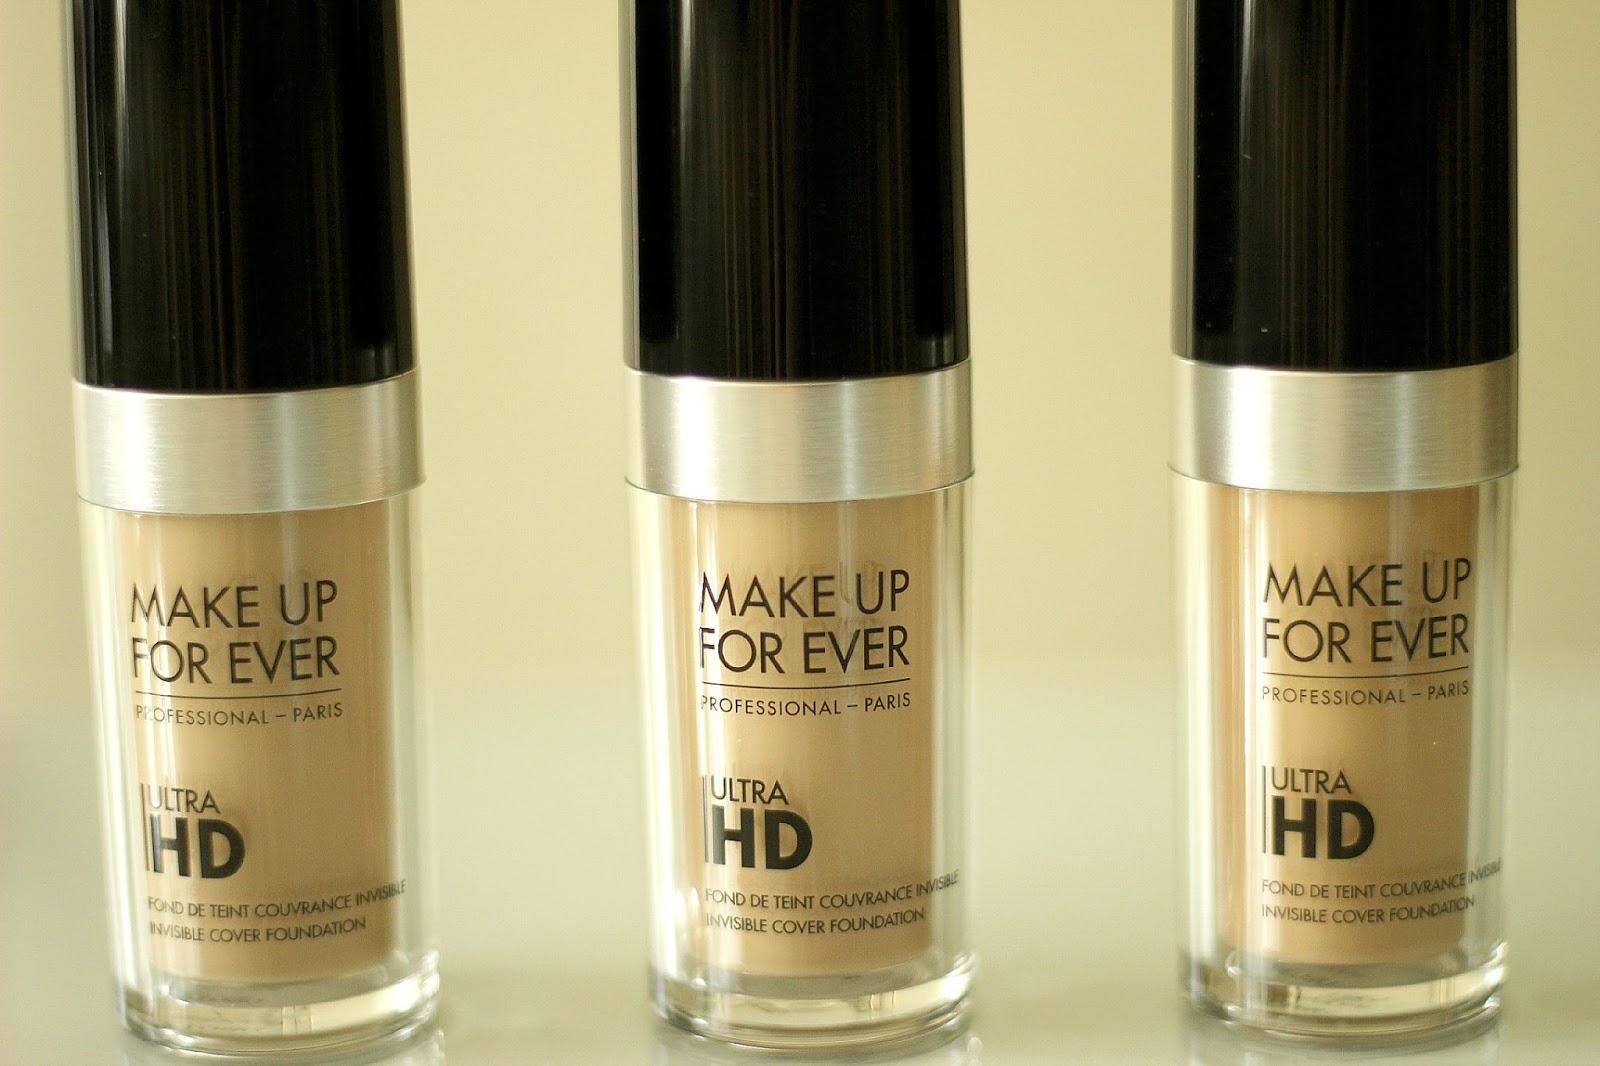 Ultra hd marble makeup forever